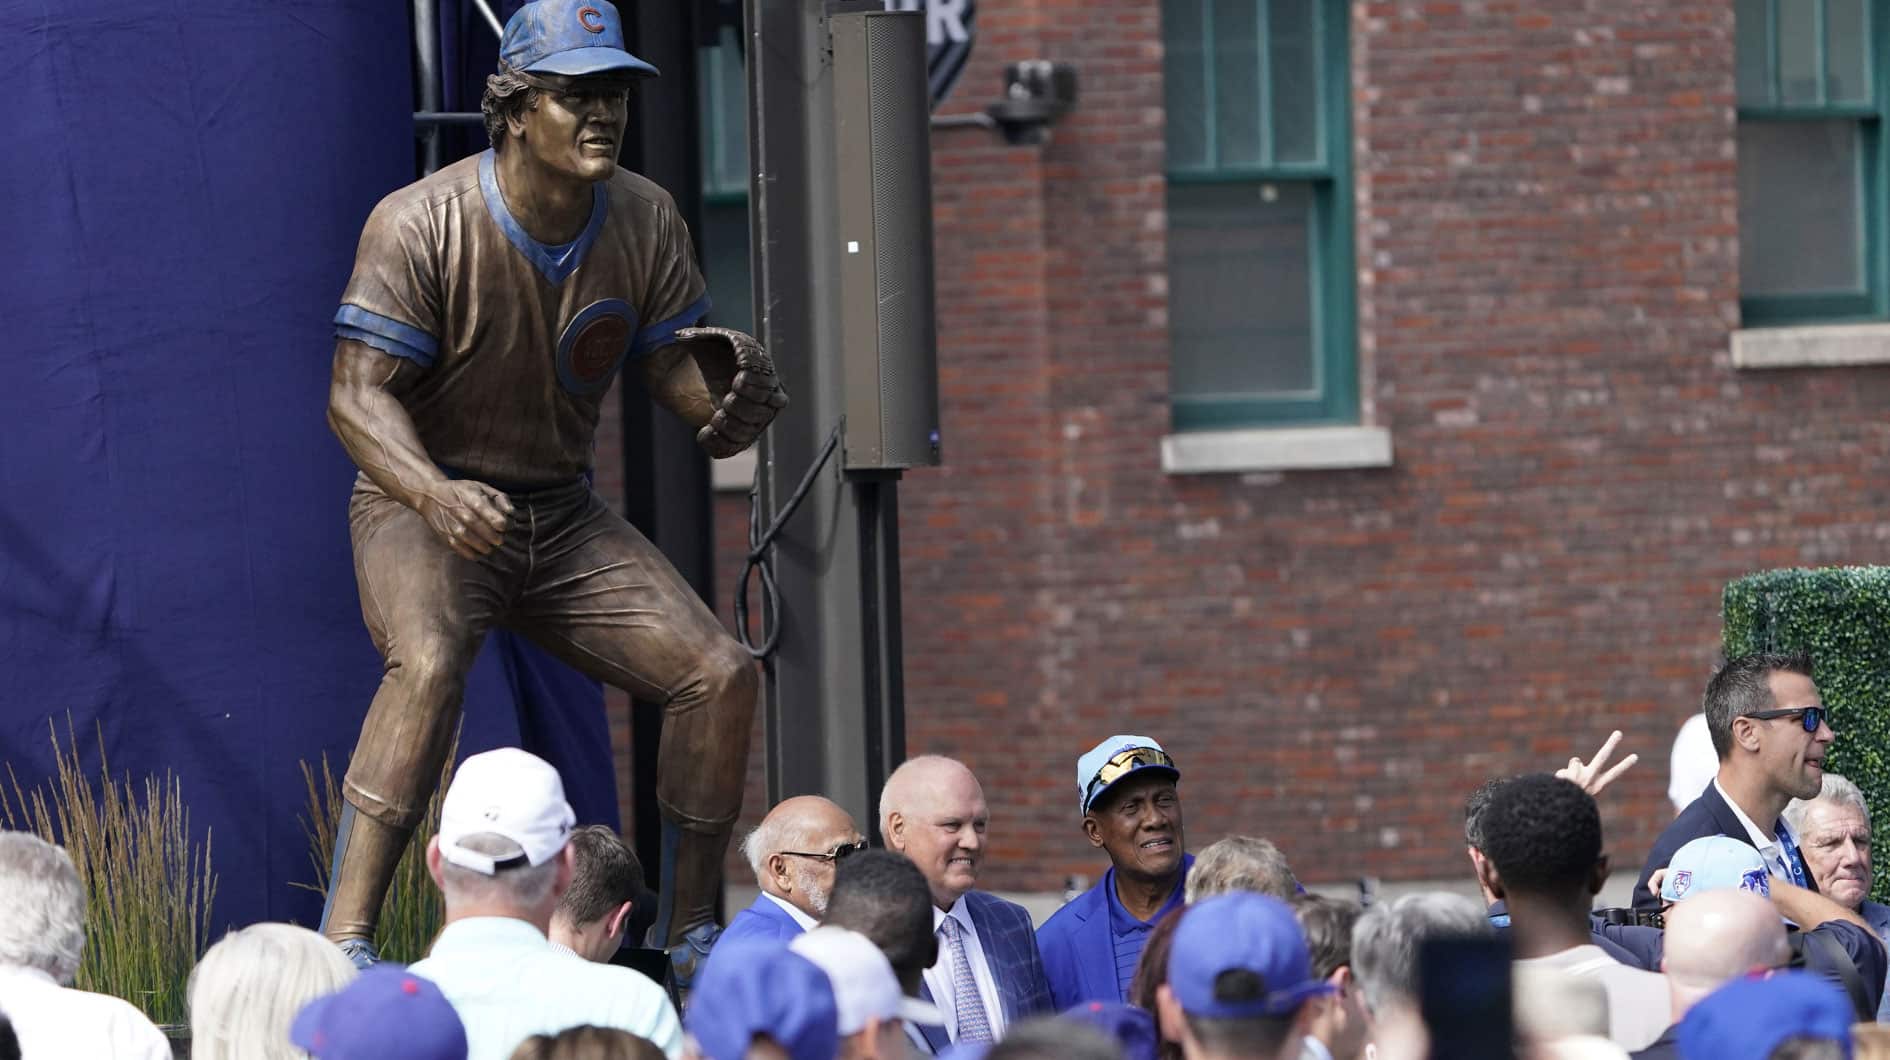  Ryne Sandberg (center) stands in front of his statue during the dedication ceremony before the game between the Chicago Cubs and the New York Mets at Wrigley Field.